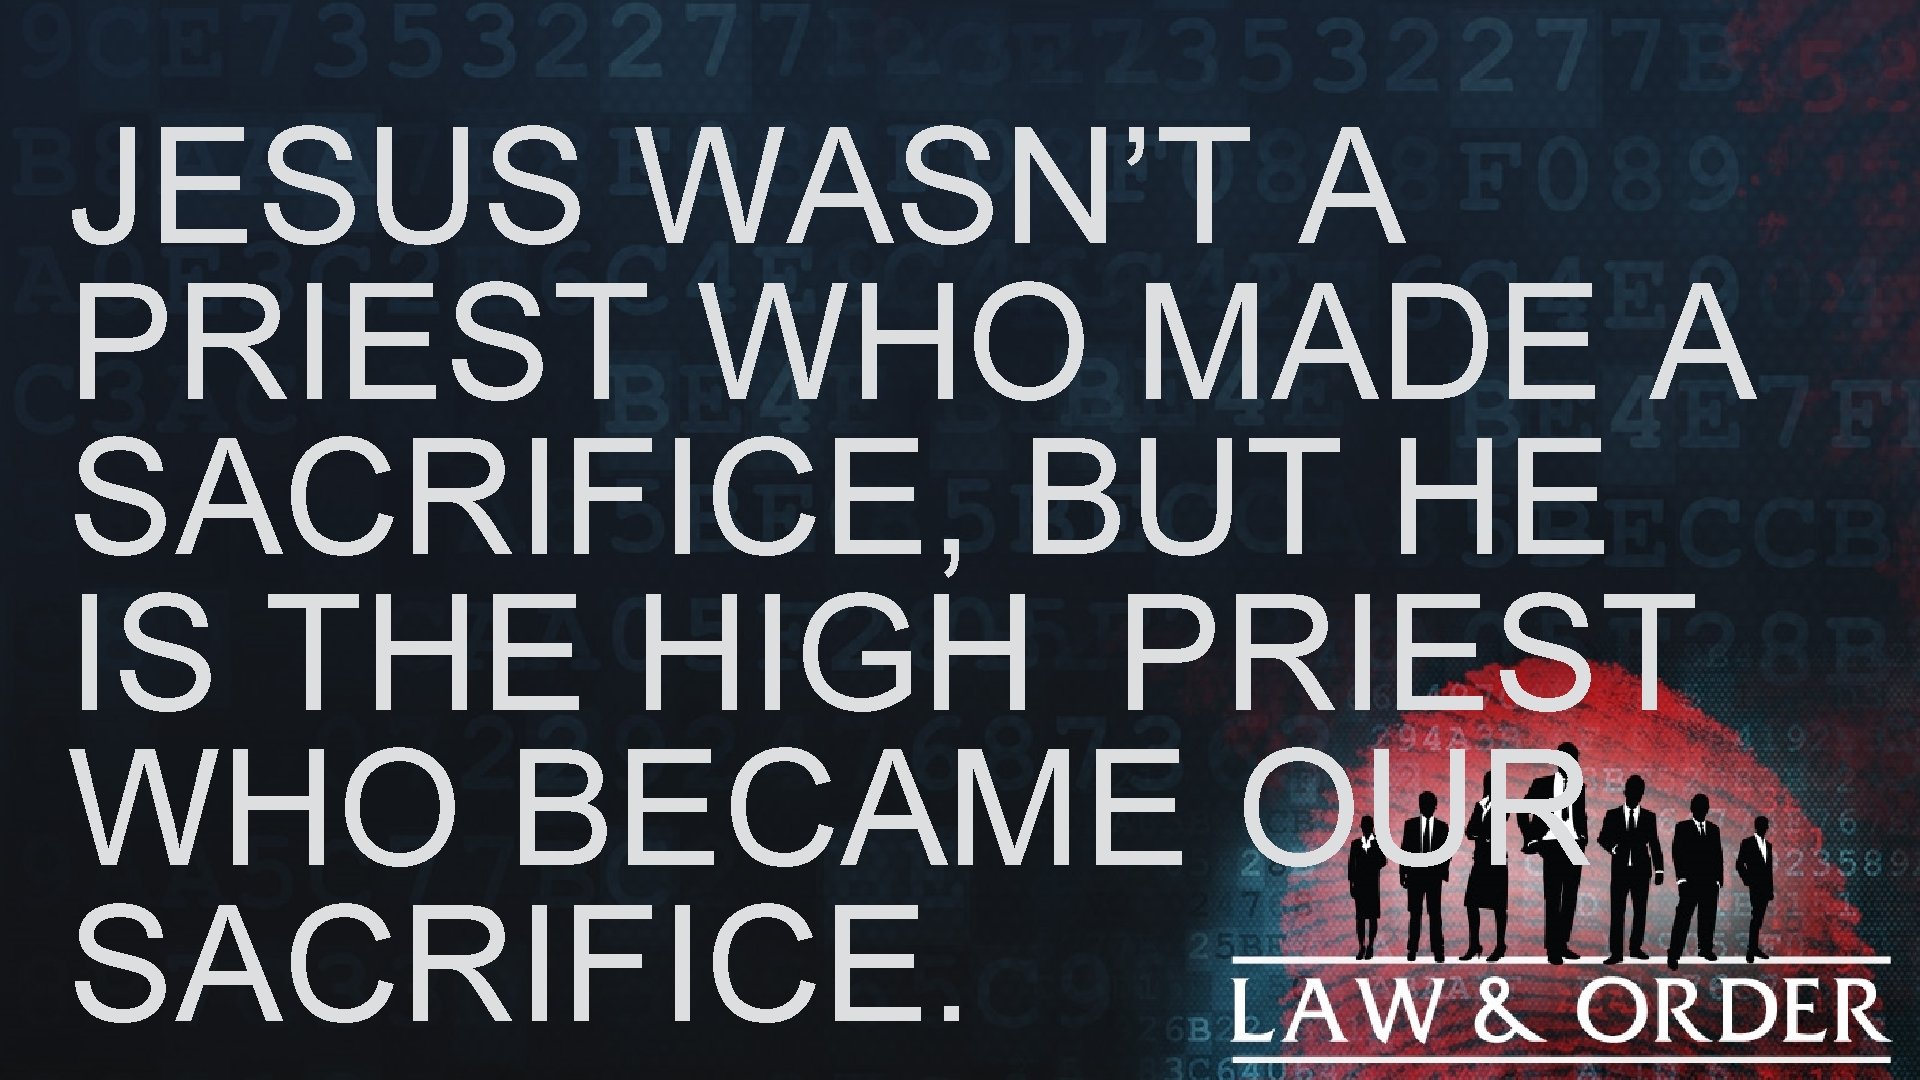 JESUS WASN’T A PRIEST WHO MADE A SACRIFICE, BUT HE IS THE HIGH PRIEST